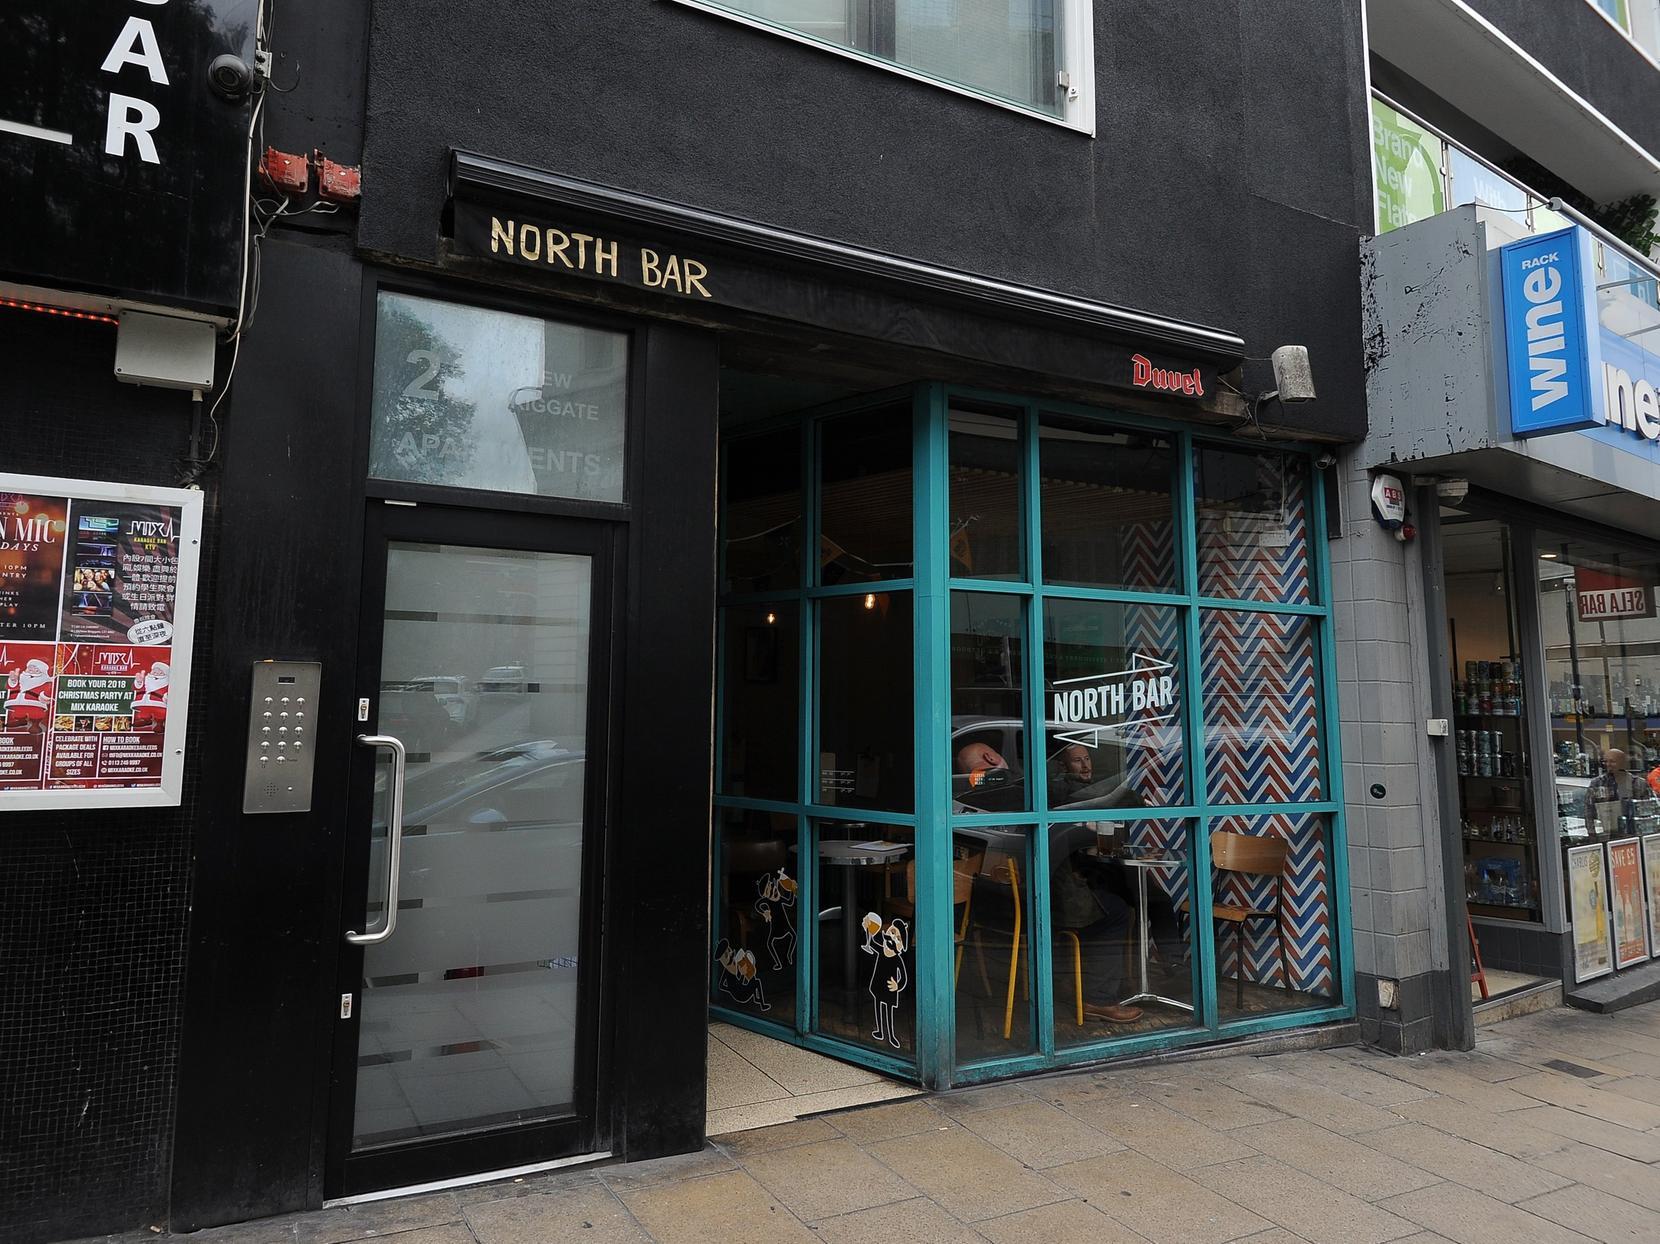 North Bar on New Briggate is hosting its annual Super Bowl party